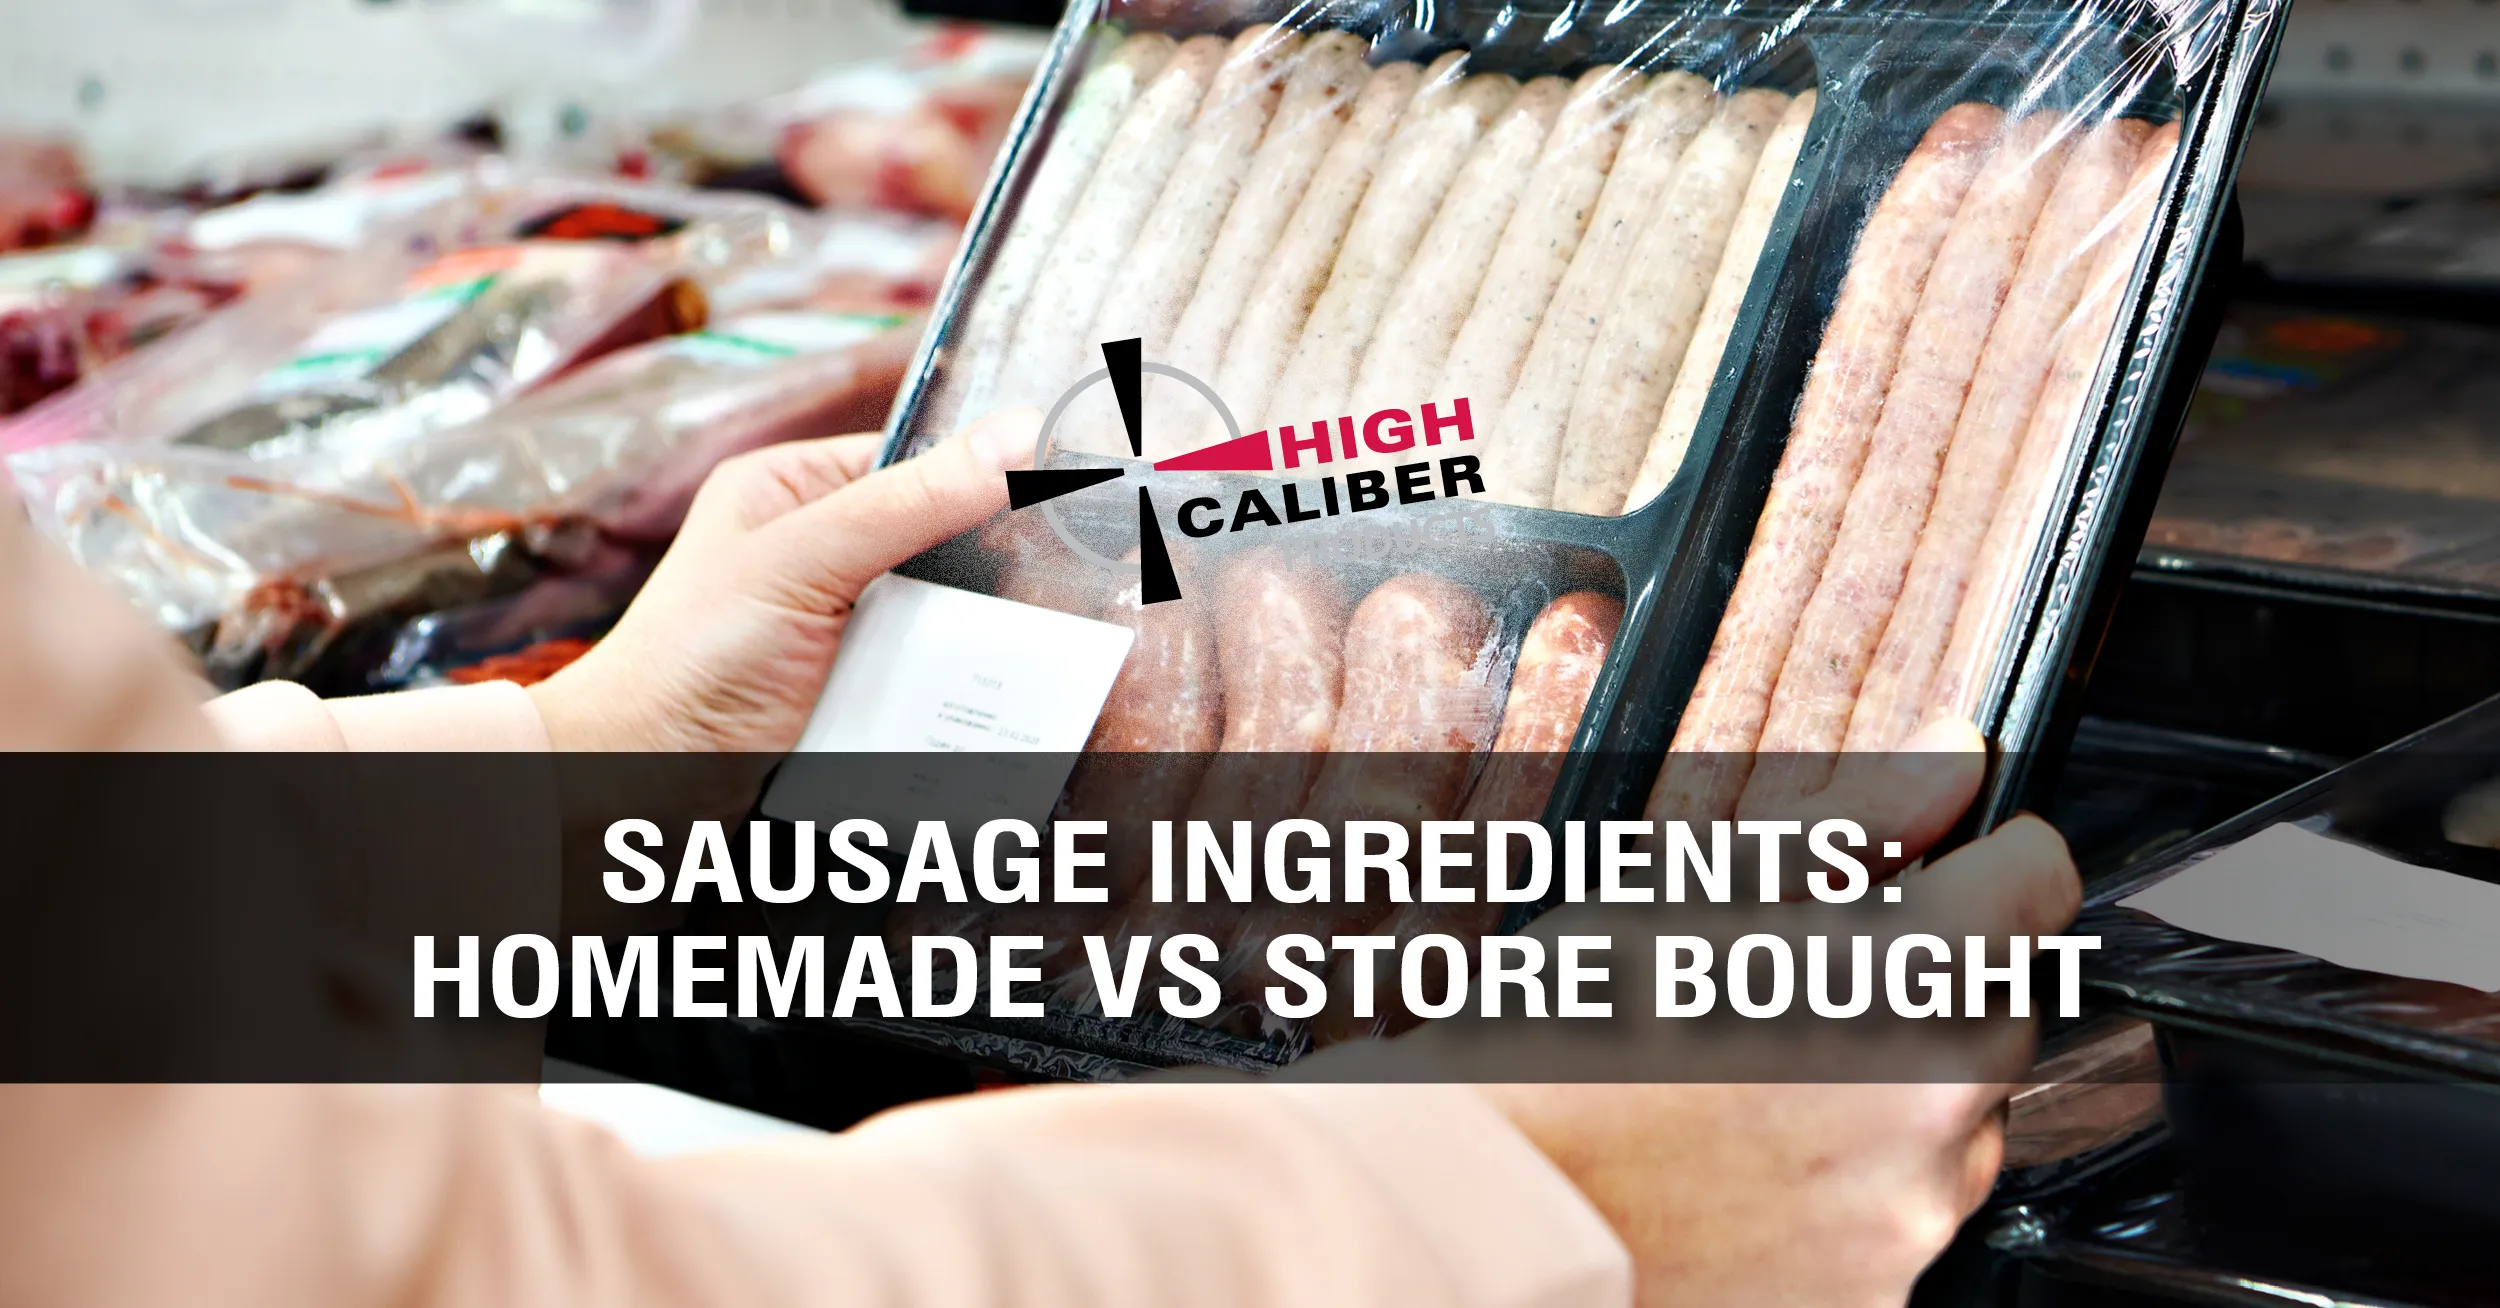 Sausage Ingredients homemade vs store bought high caliber